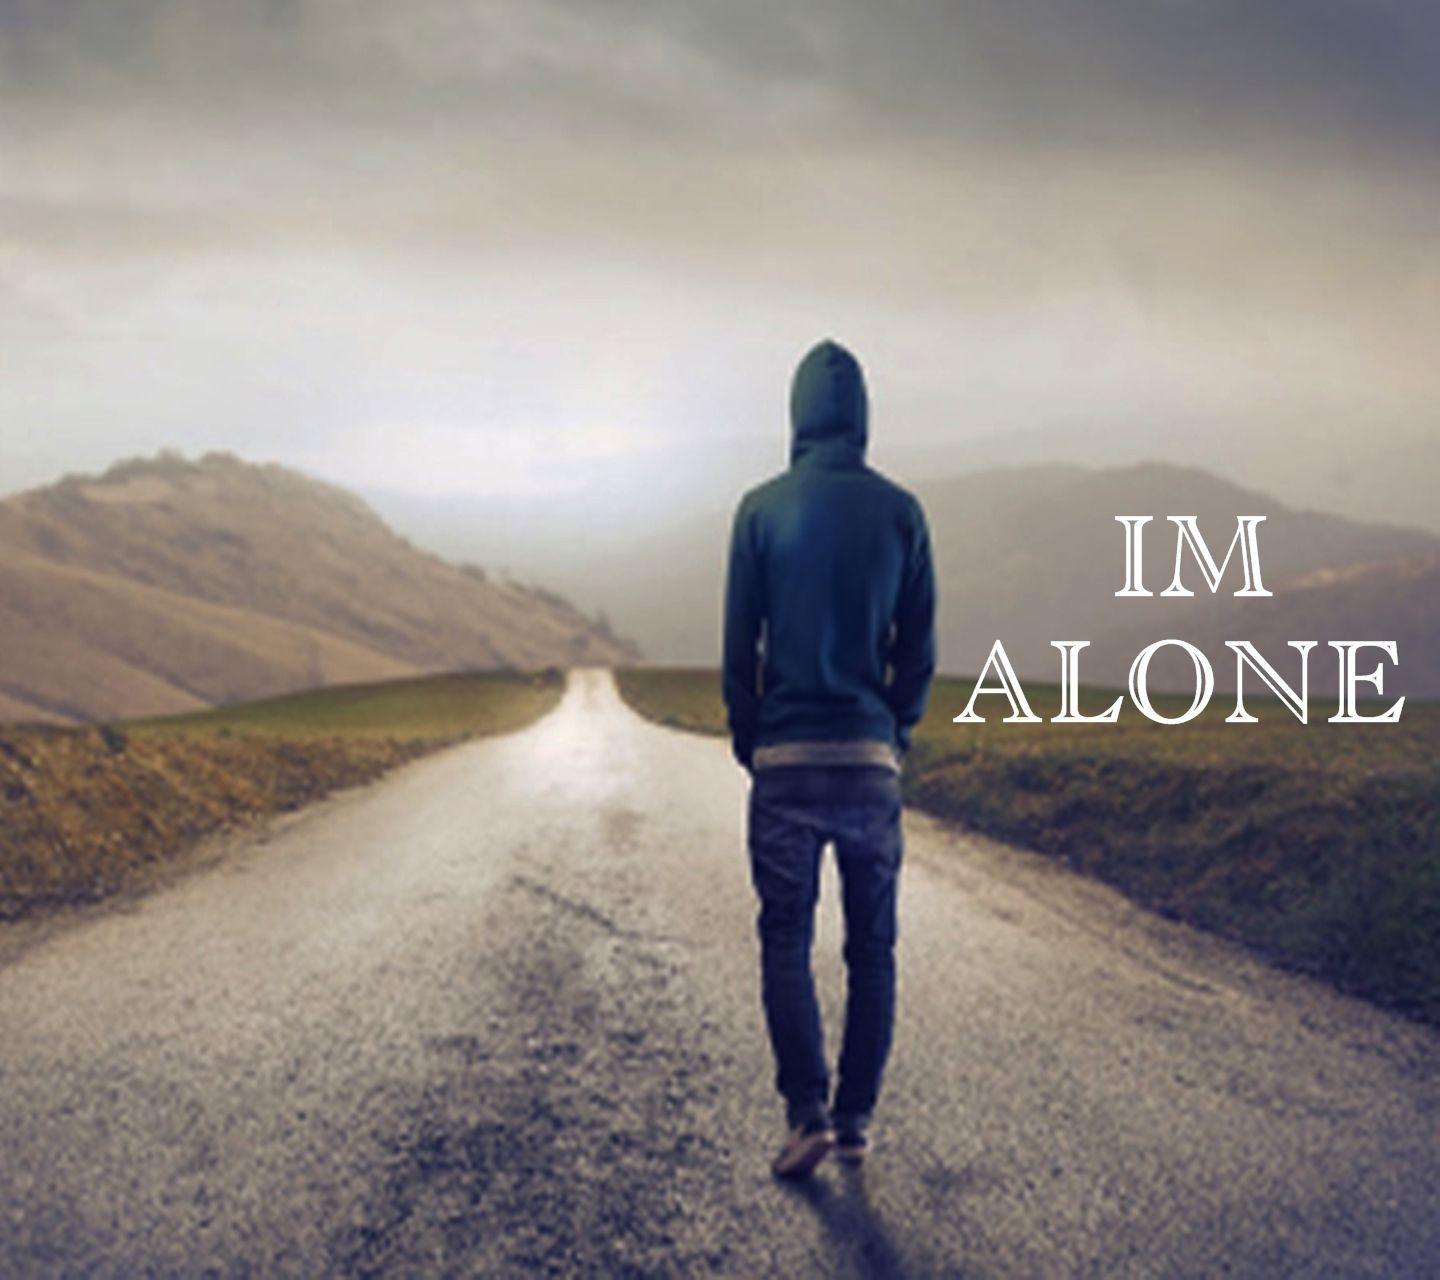 I AM Alone Wallpapers - Top Free I AM Alone Backgrounds ...